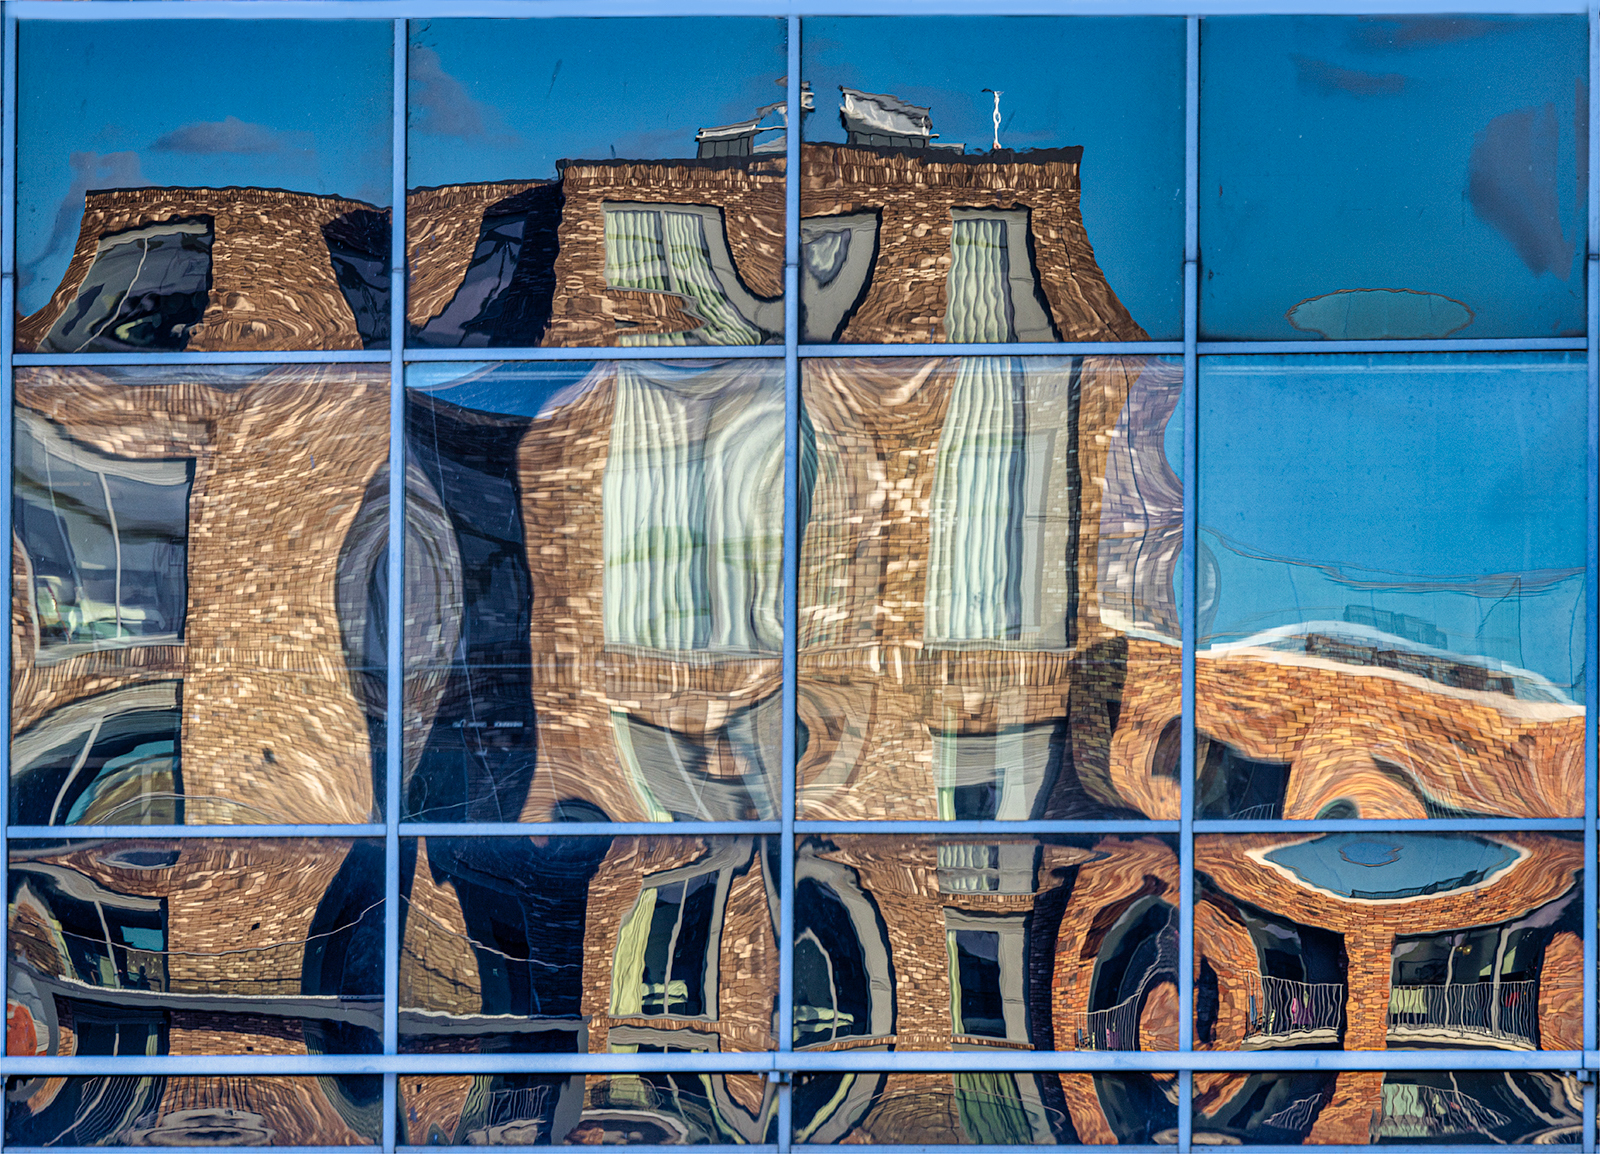 REFLECTIONS IN THE STYLE OF GAUDI by Nigel Stewart